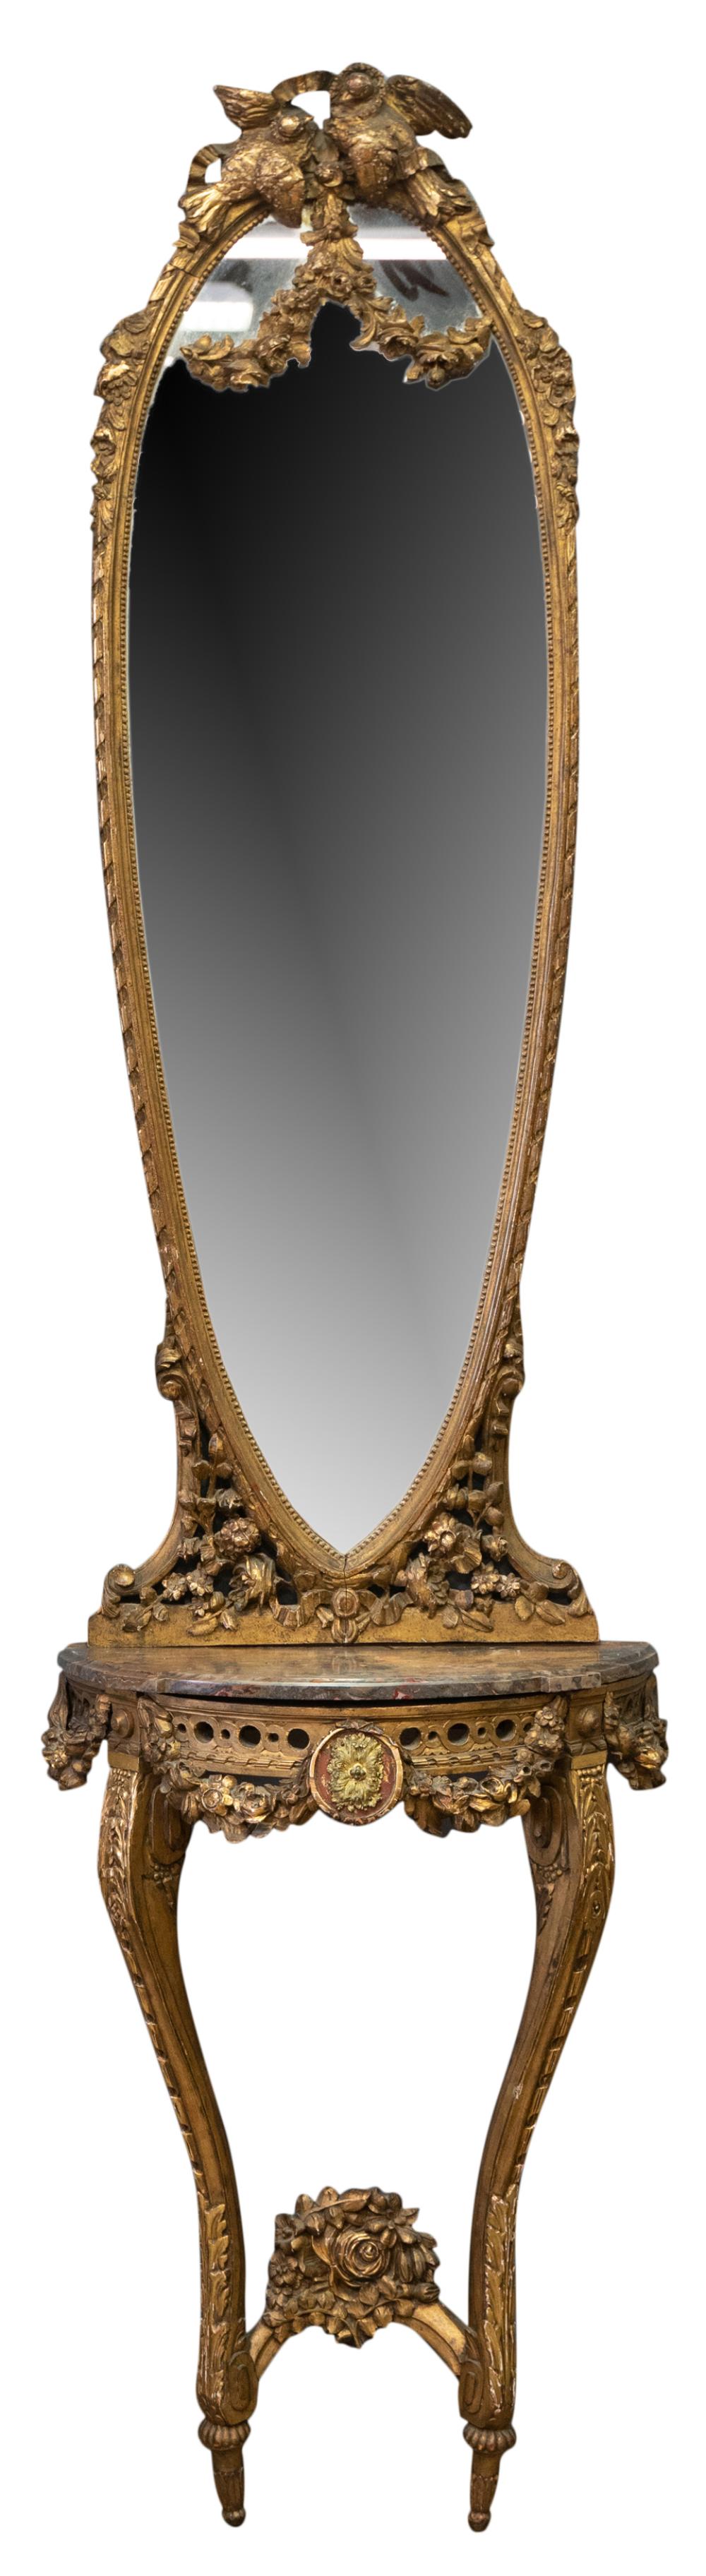 CONTINENTAL CARVED GILTWOOD MIRROR 3b5412